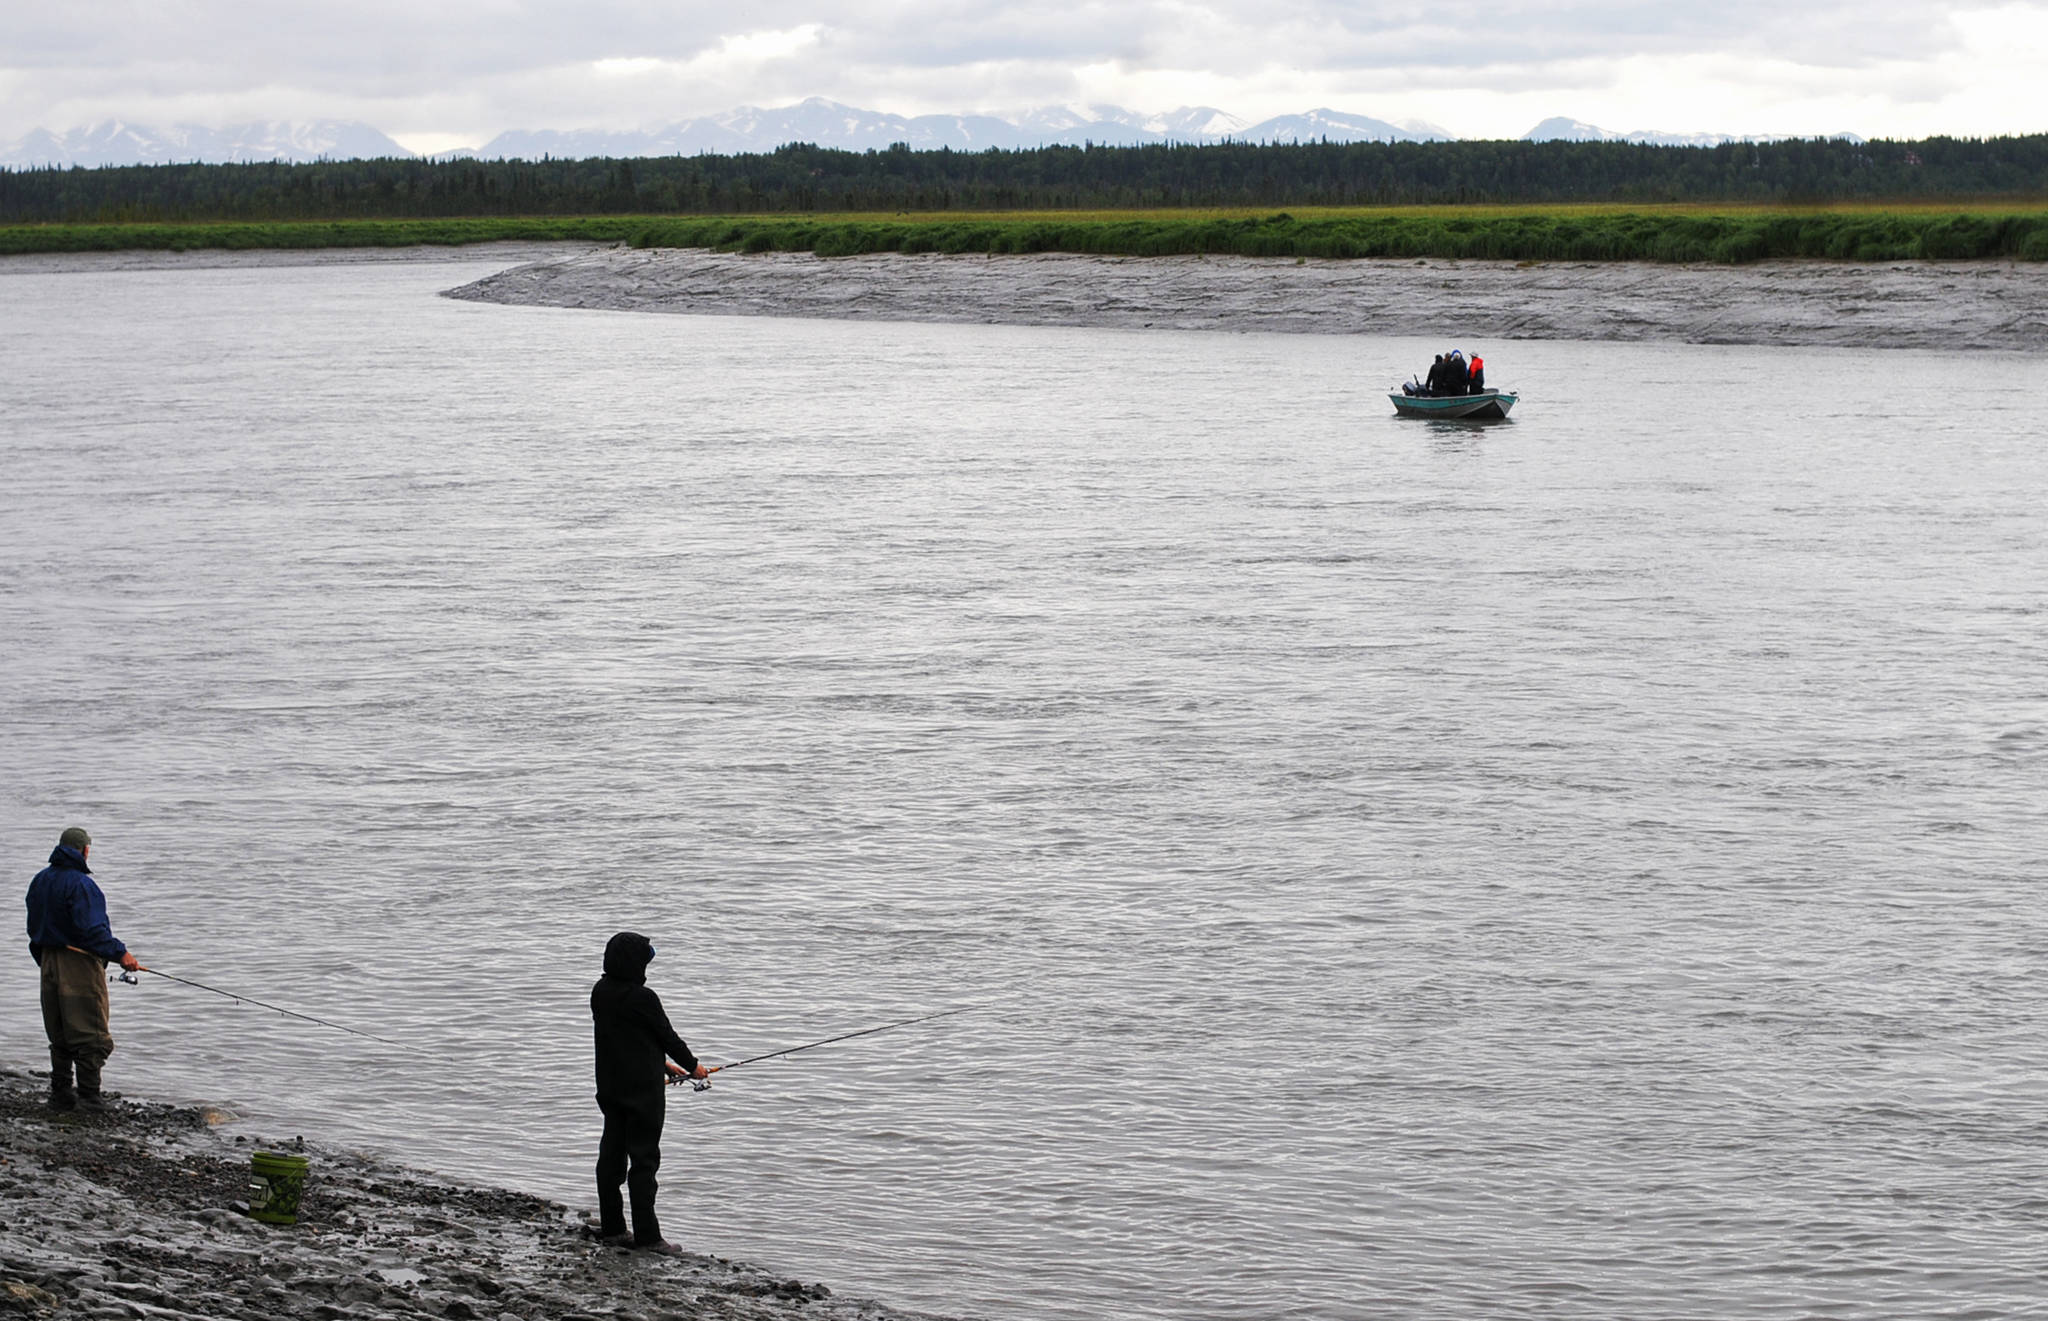 Anglers cast for sockeye salmon from the Kenai River bank at Cunningham Park on Wednesday, July 19, 2017 in Kenai, Alaska. After several days of heavy rain across the central Kenai Peninsula, the weather began to clear Wednesday, with the rain predicted to clear Thursday in exchange for clouds and some sunshine, transitioning to mixed clouds and sunshine and temperatures in the mid-60s, according to the National Weather Service. (Photo by Elizabeth Earl/Peninsula Clarion)